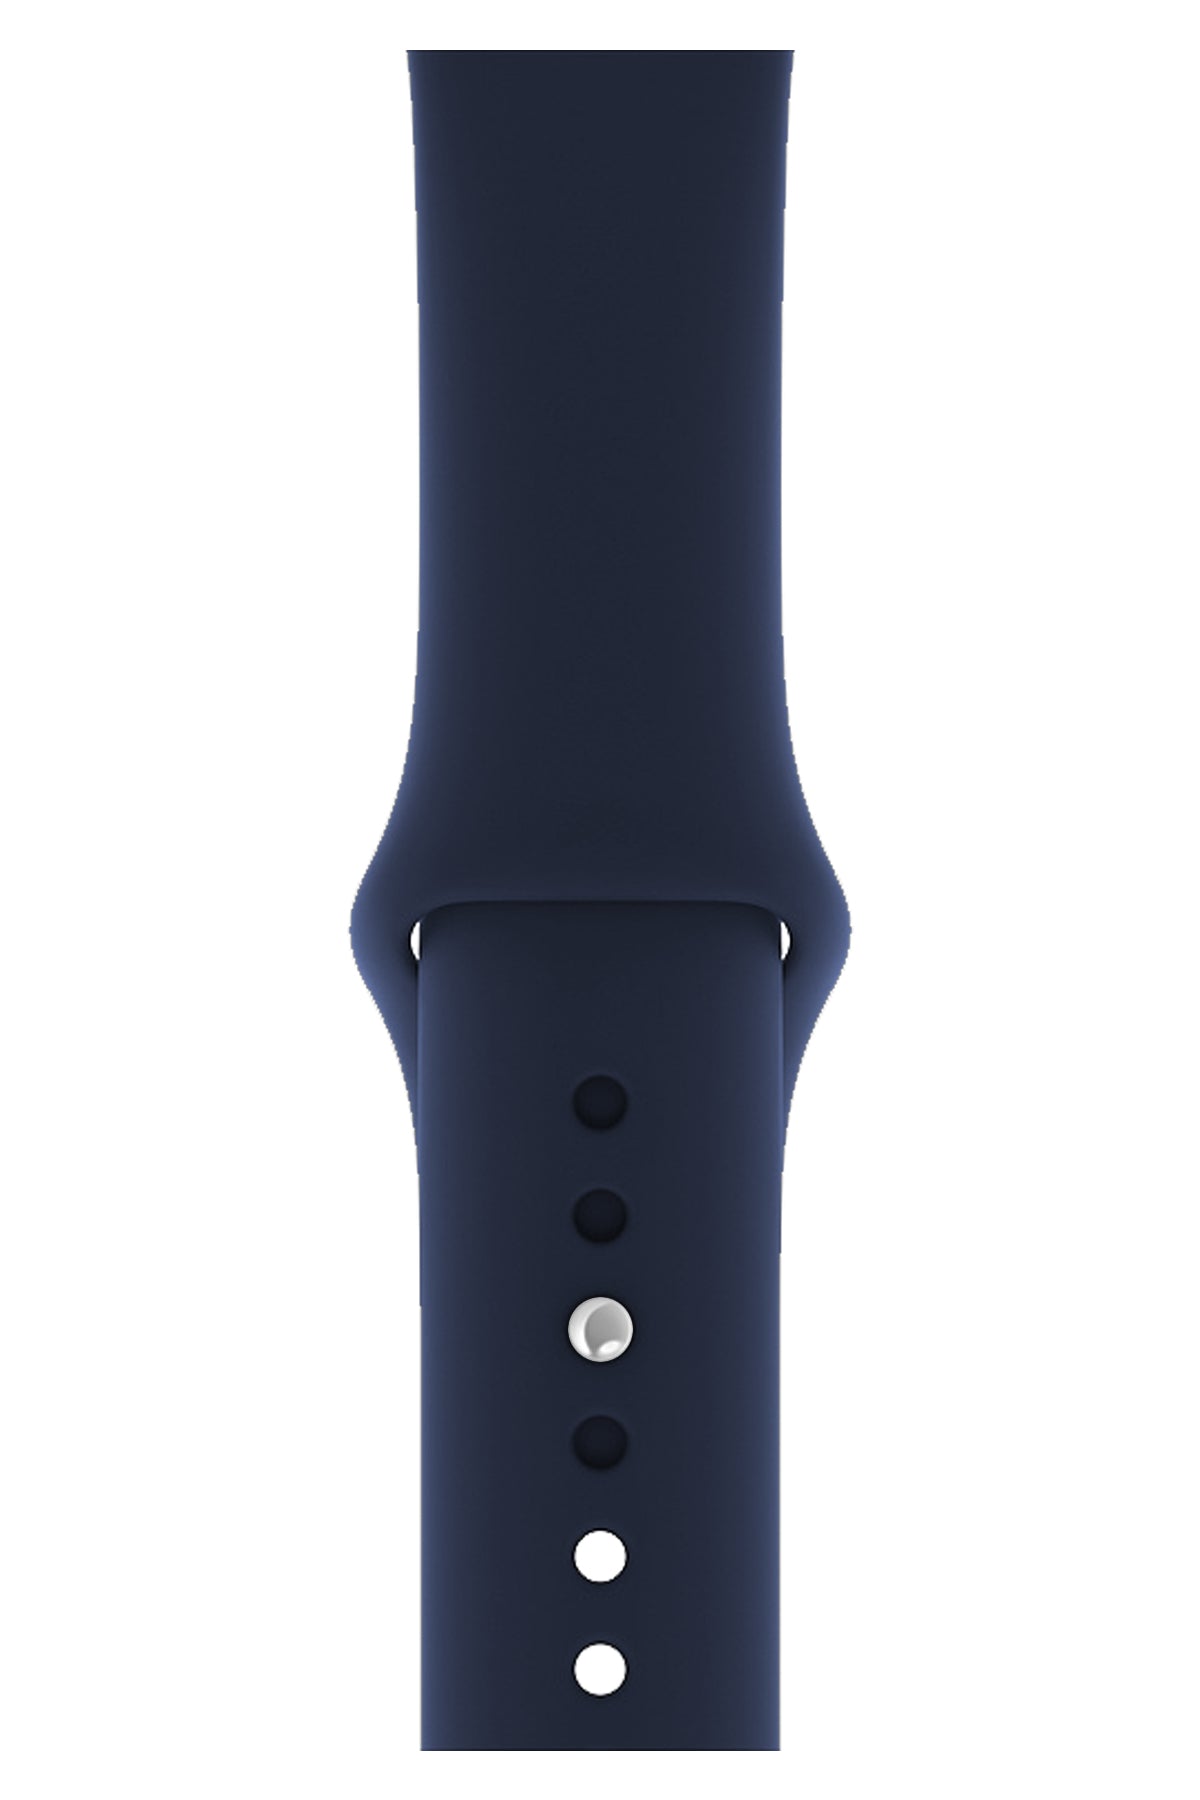 Apple Watch Compatible Silicone Sport Band Navy Blue 